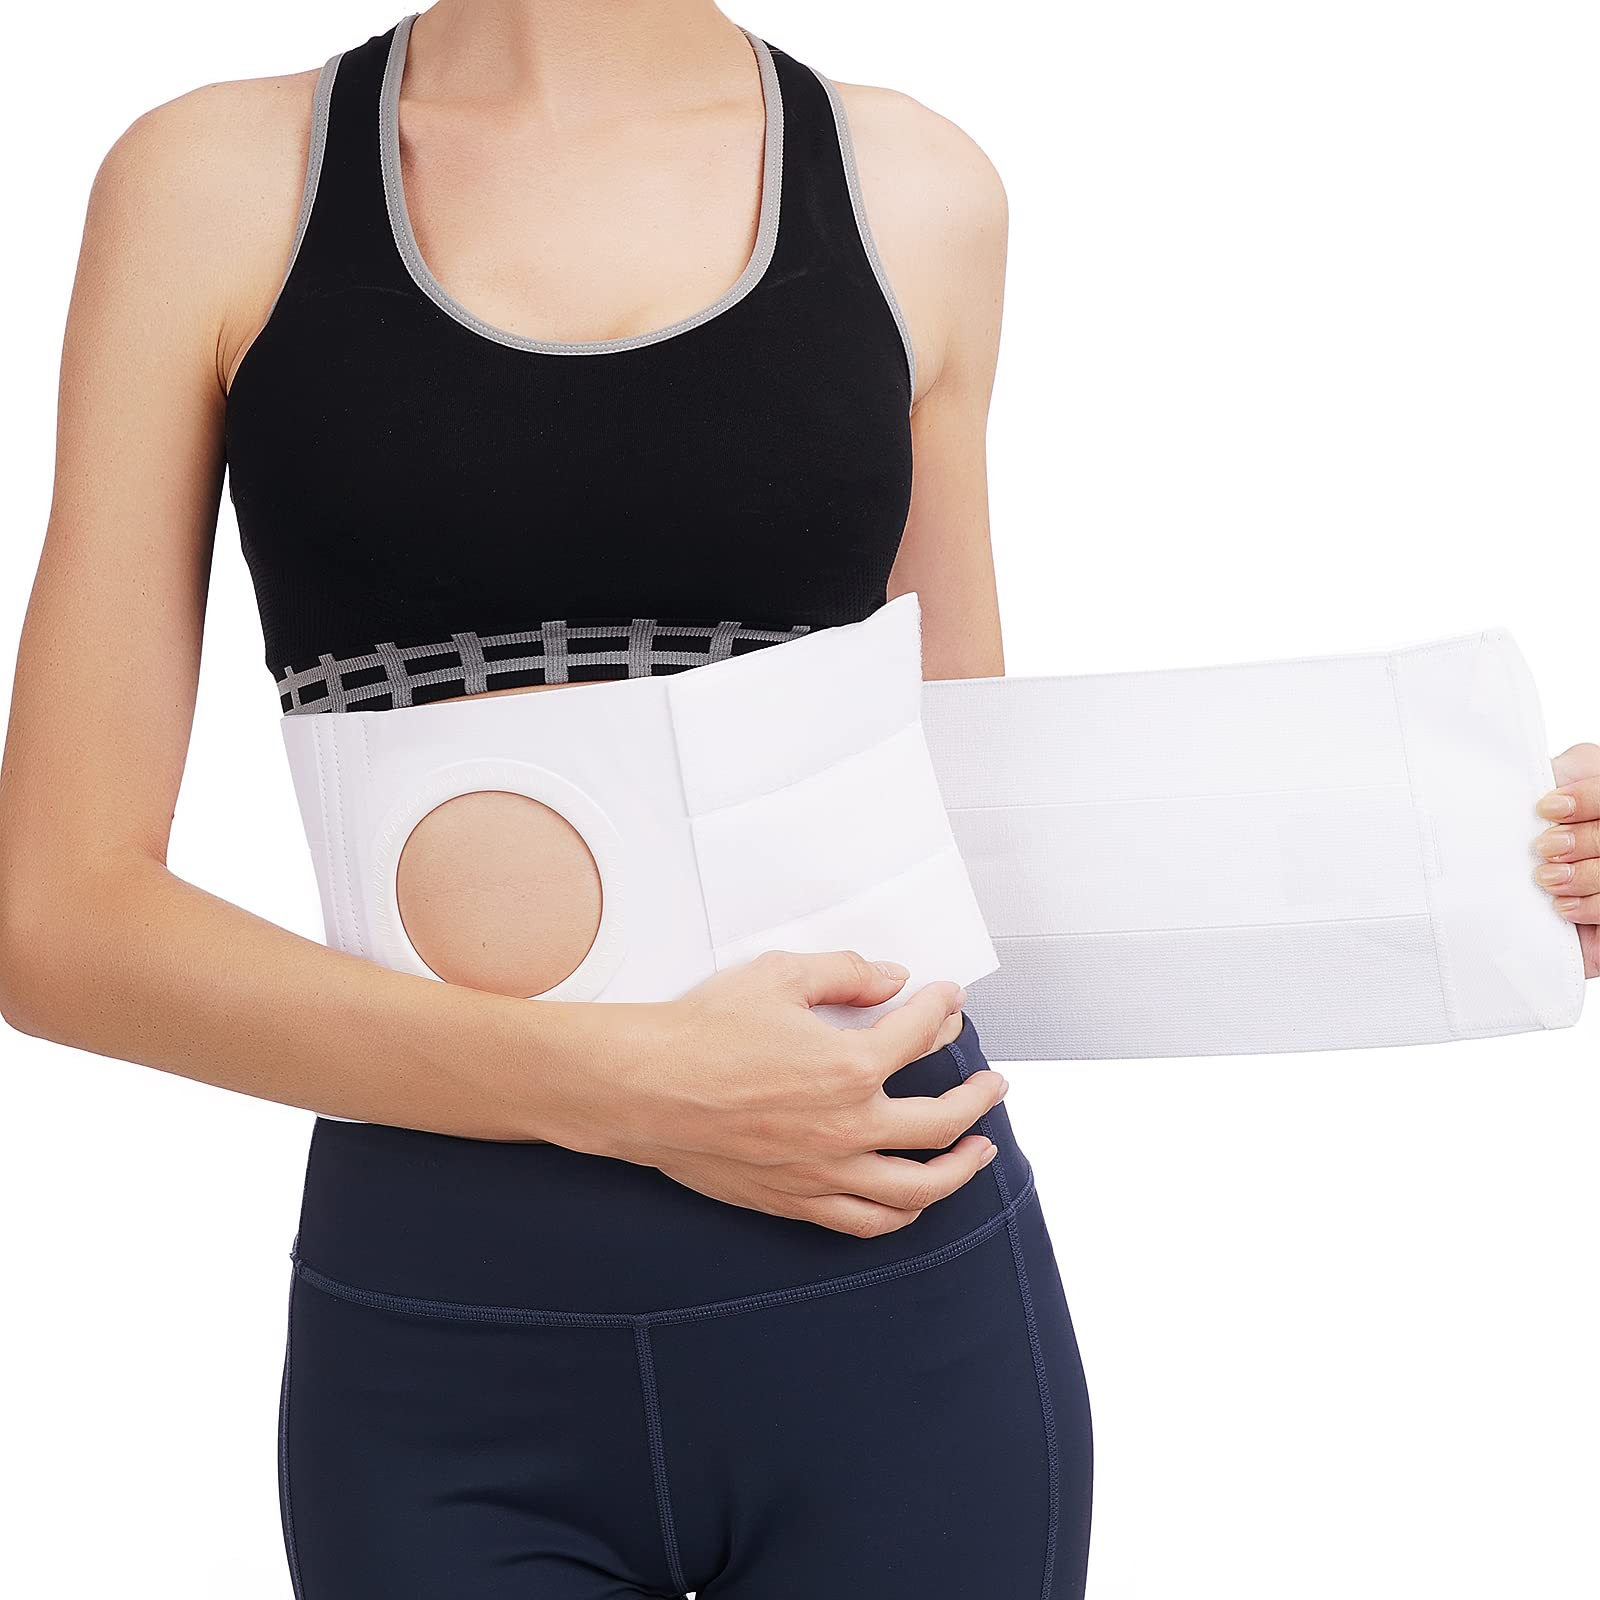 Stoma belts for support and fixation of ostomy bag